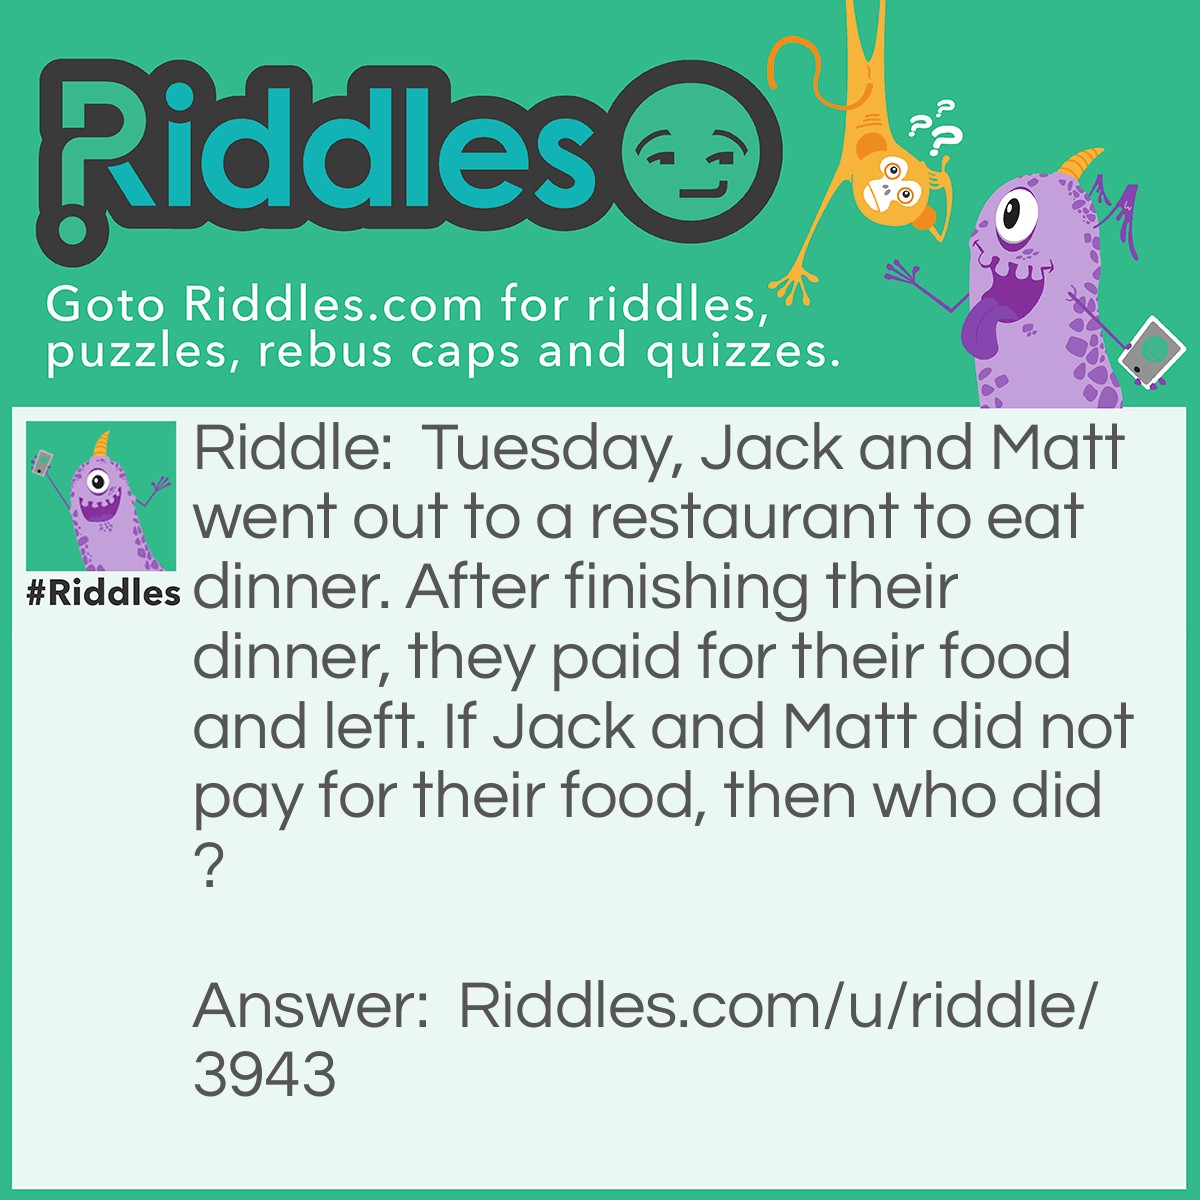 Riddle: Tuesday, Jack and Matt went out to a restaurant to eat dinner. After finishing their dinner, they paid for their food and left. If Jack and Matt did not pay for their food, then who did? Answer: Tuesday (the name of the person, not the day).